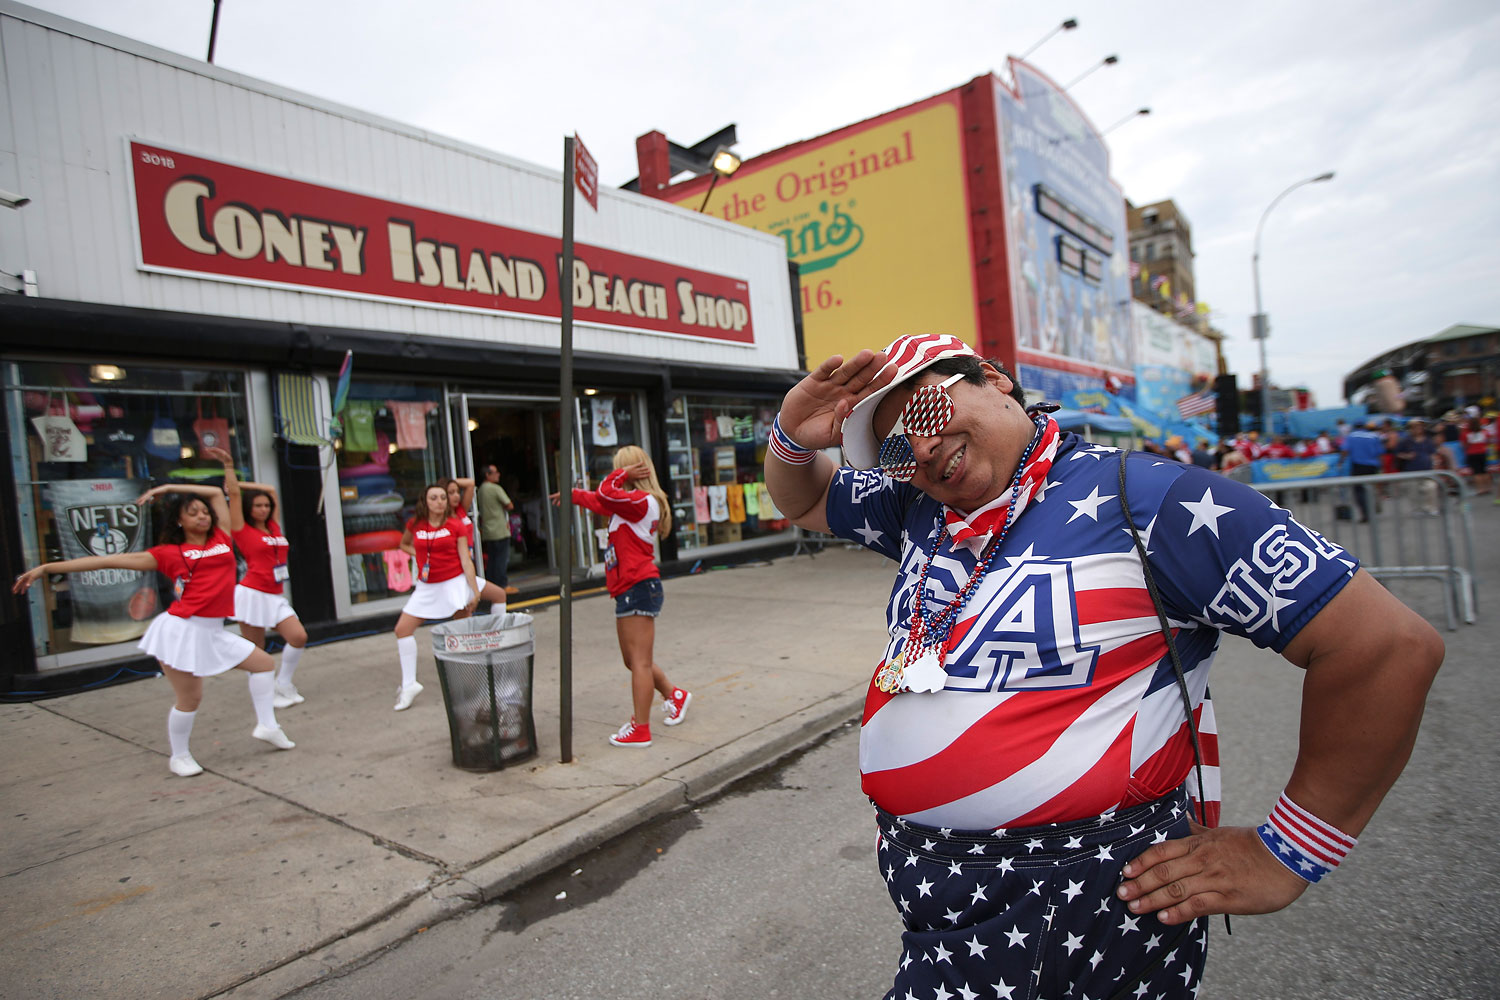 Paul Calienes poses for a photo before the Nathan's Famous Fourth of July International Hot Dog Eating contest at Coney Island, Friday, July 4, 2014, in New York.